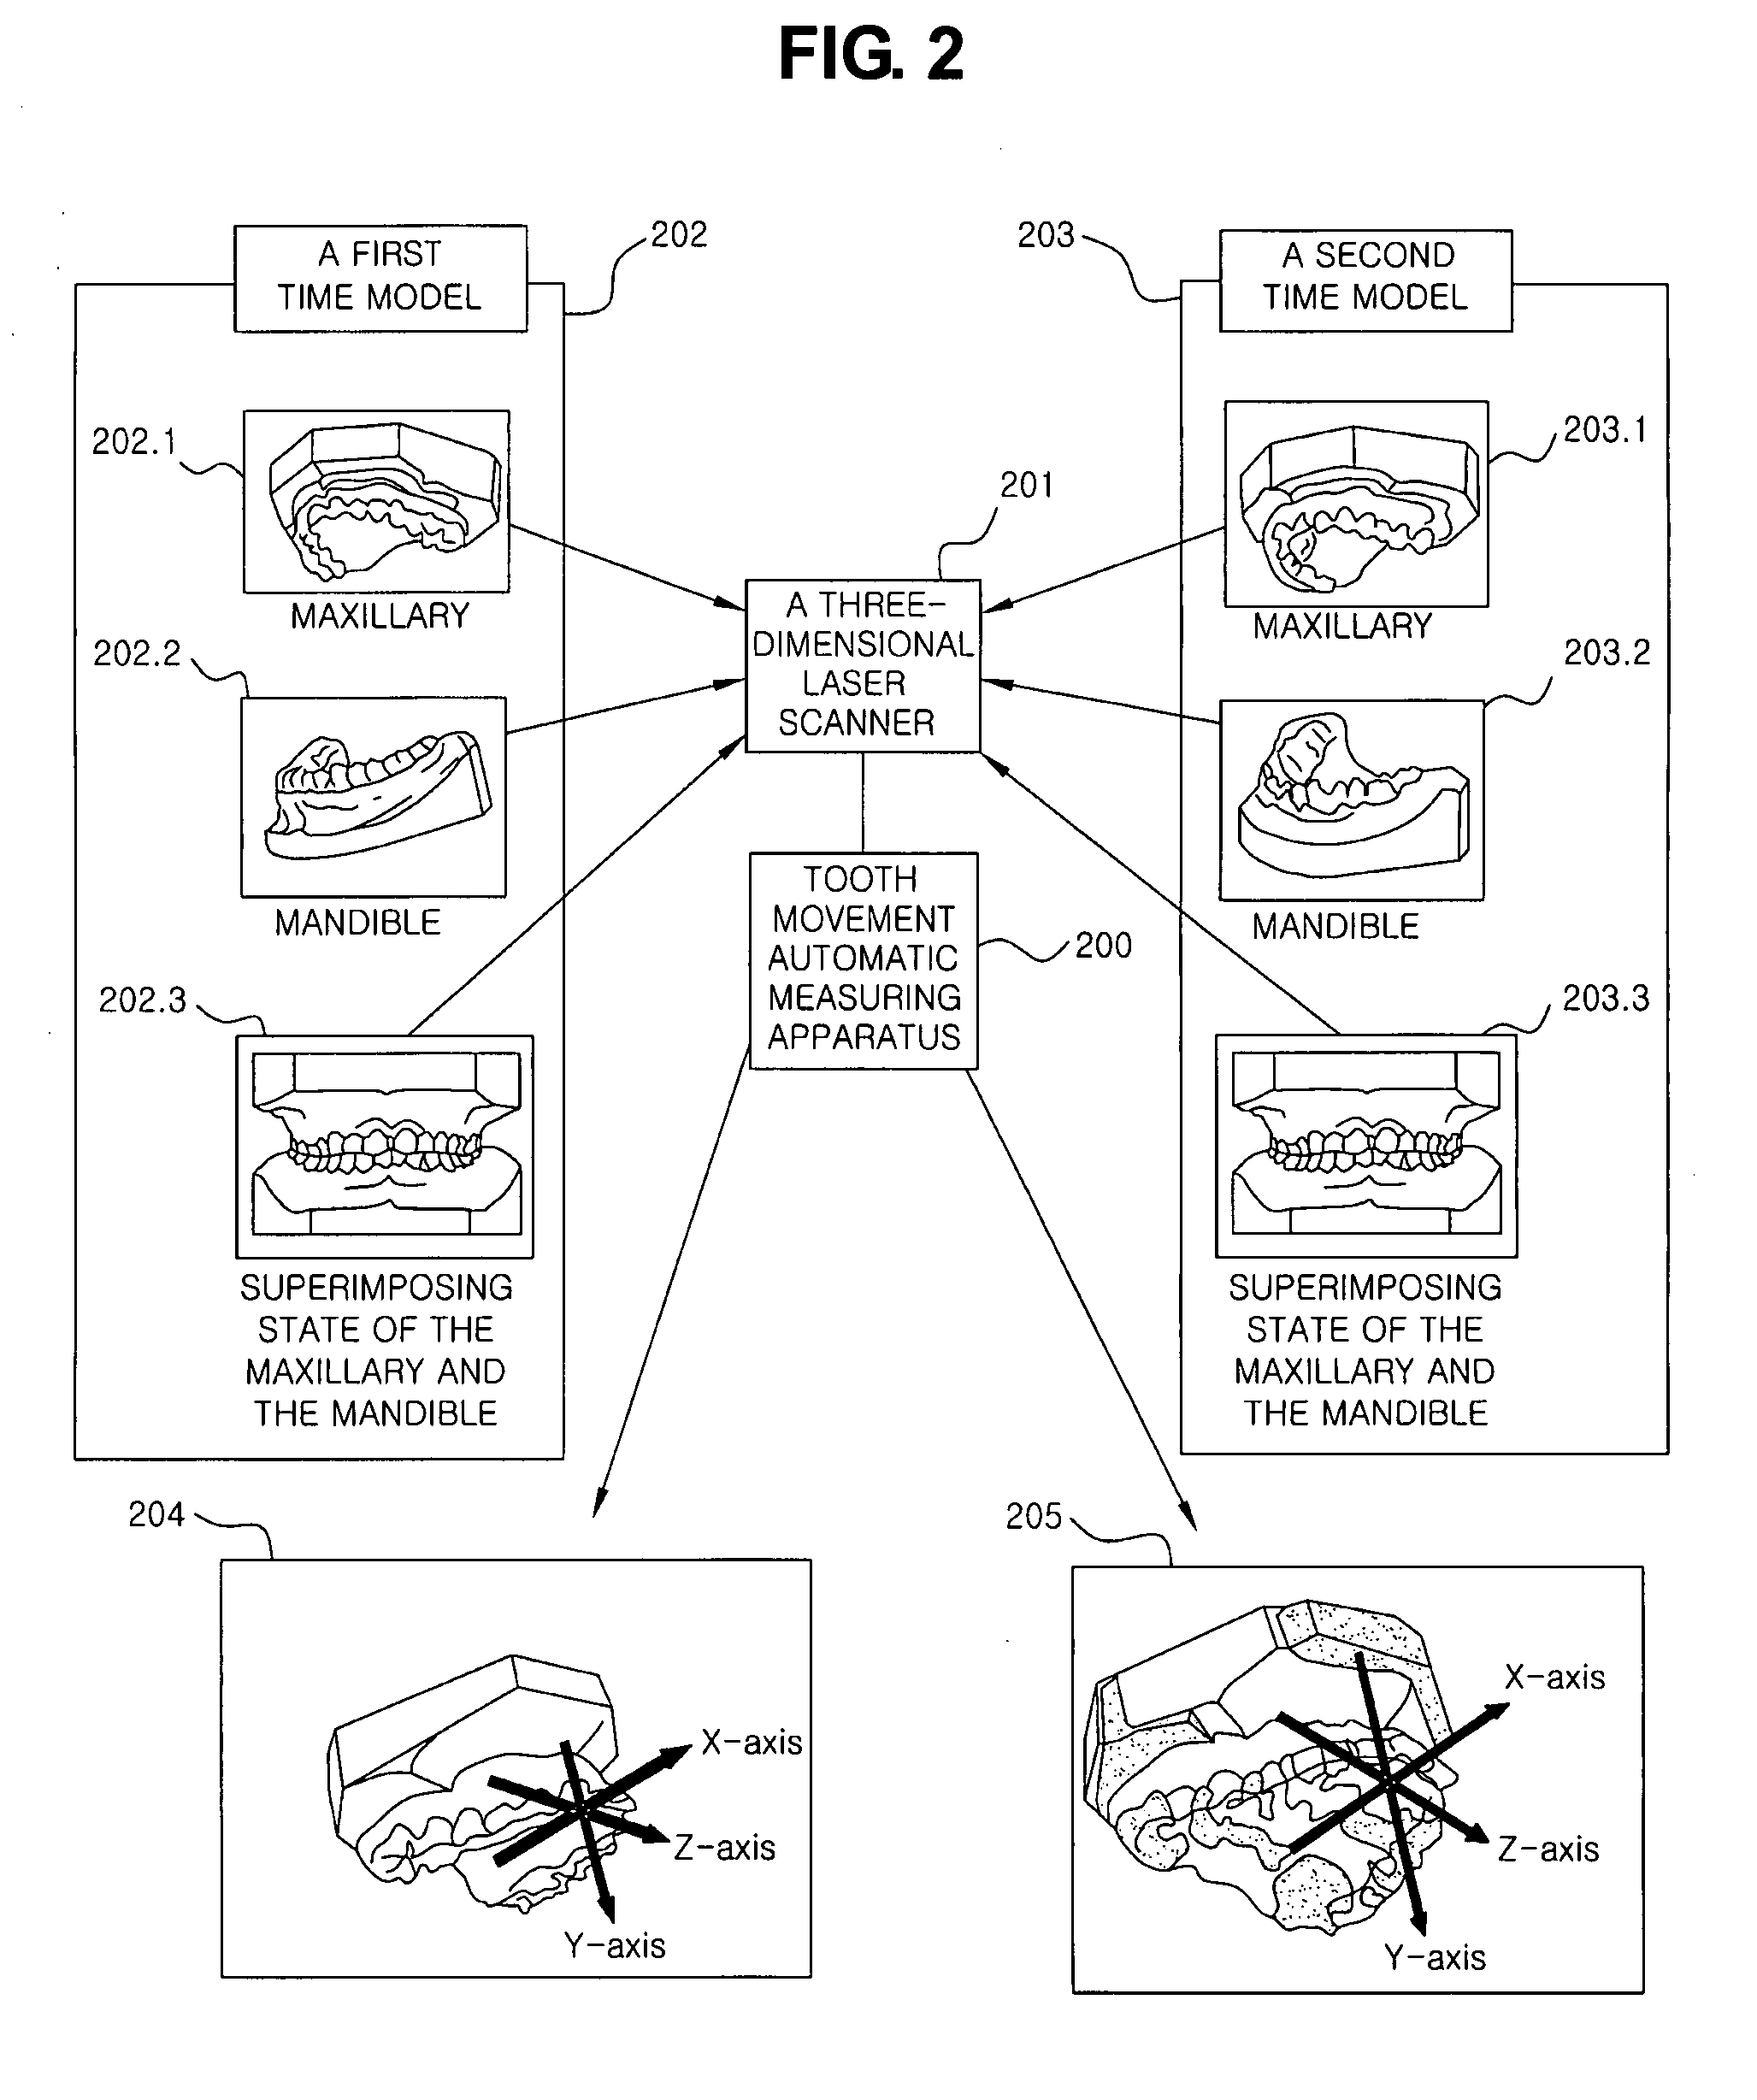 Automatic tooth movement measuring method employing three dimensional reverse engineering technique